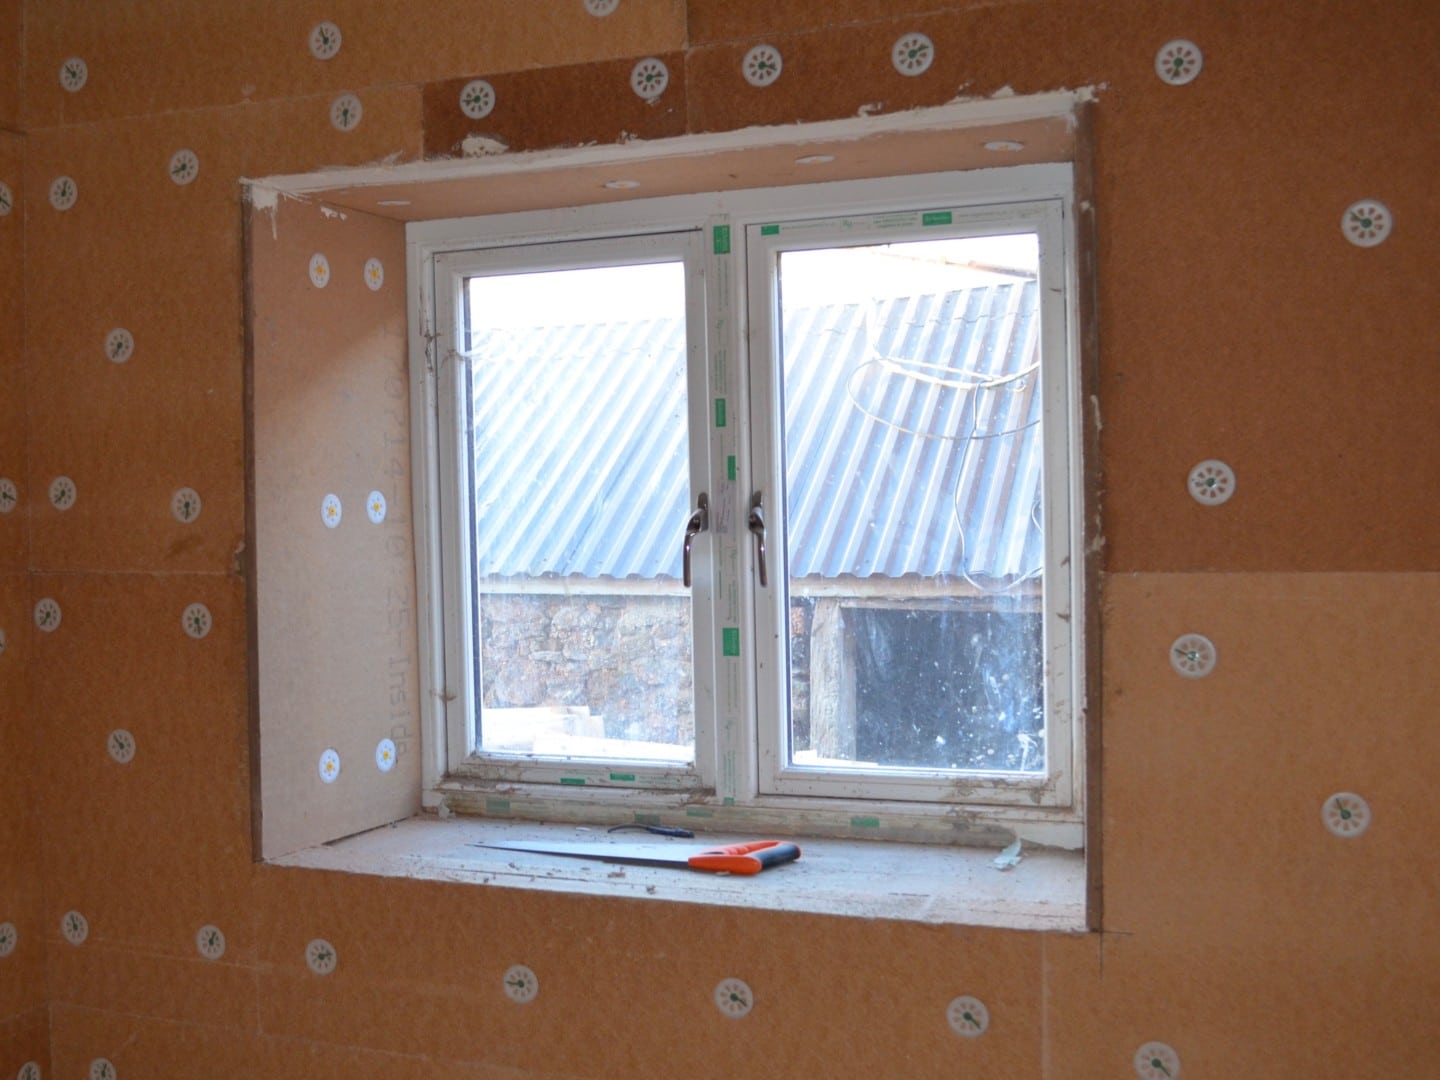 Here you can see the Unger-Diffutherm boards being used in the UdiIN system inside an old stone cottage. Unusually the walls were very flat so no levelling coat plaster was required prior to installation.

These boards were then coated in the UdiMULTIGRUND vapour regulating plaster and the surface was finished with the Baumit Klima Glatte fine lime skimming plaster.